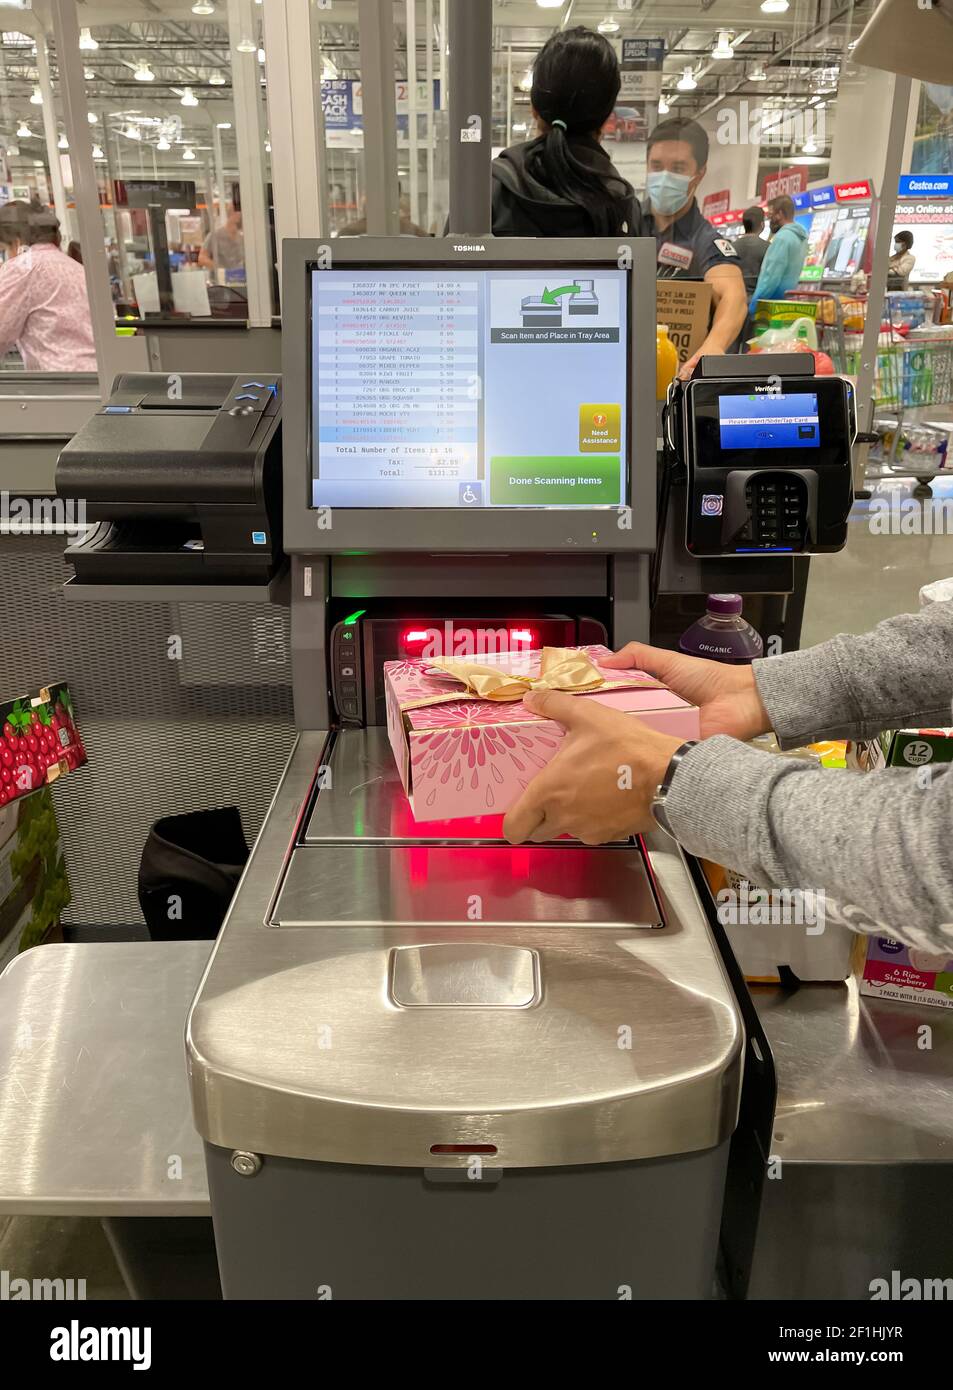 McKinney, TX USA - February 22, 2021: A close up view of a customer using a  kiosk at a newly opened self check out the area in Costco Stock Photo -  Alamy